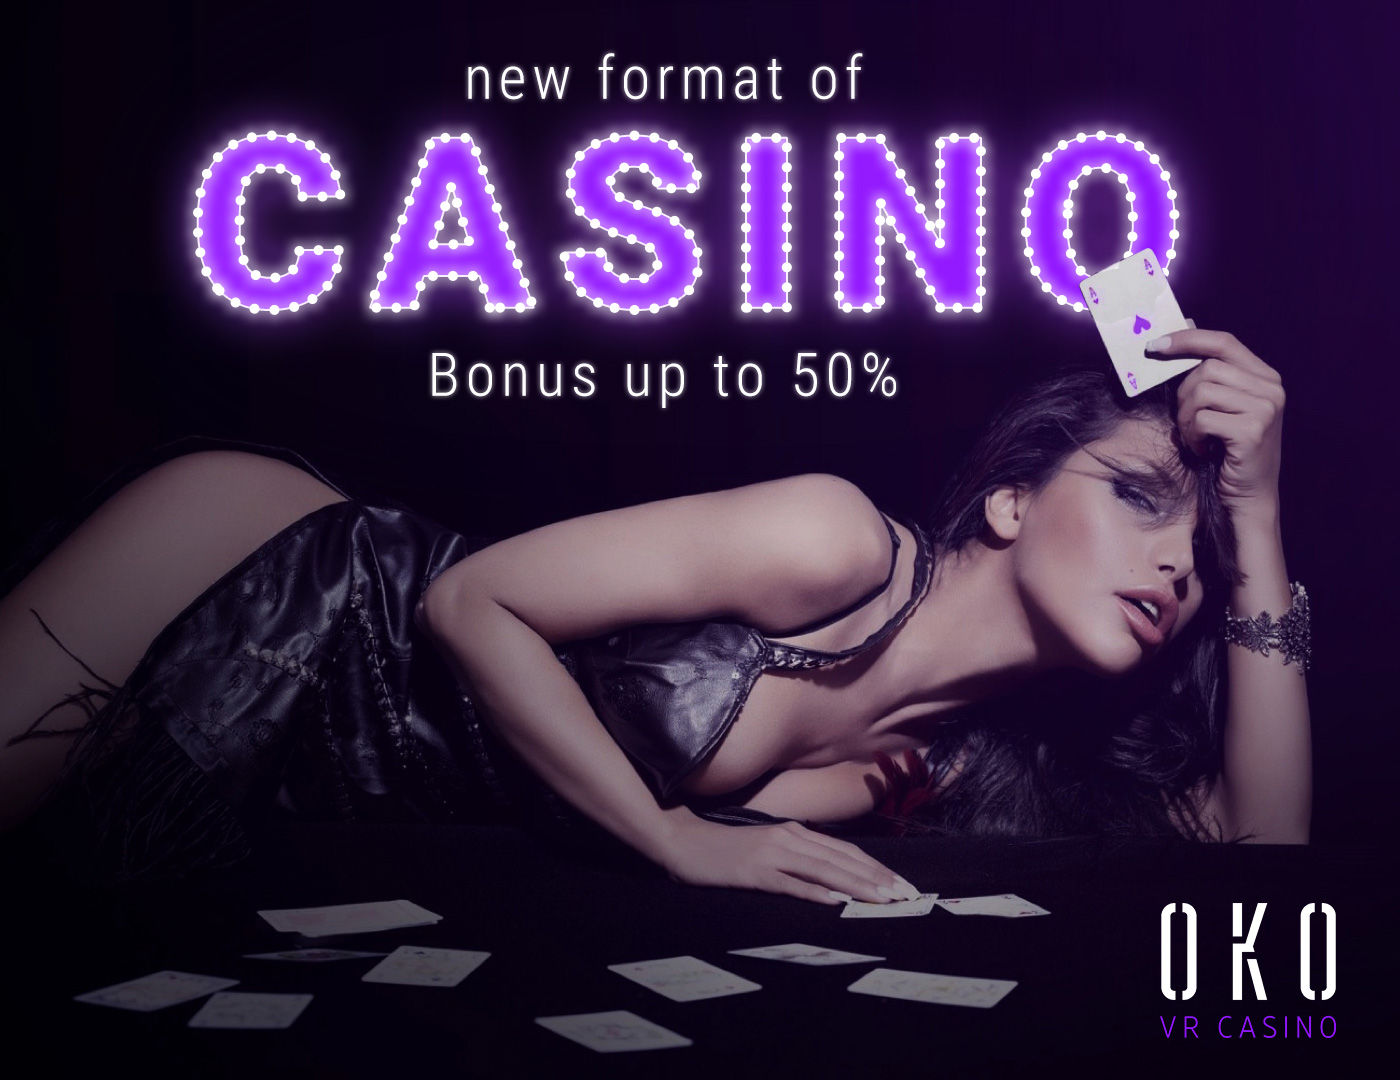 VR Casino OKO Is a New Project Based on OKOIN Tokens